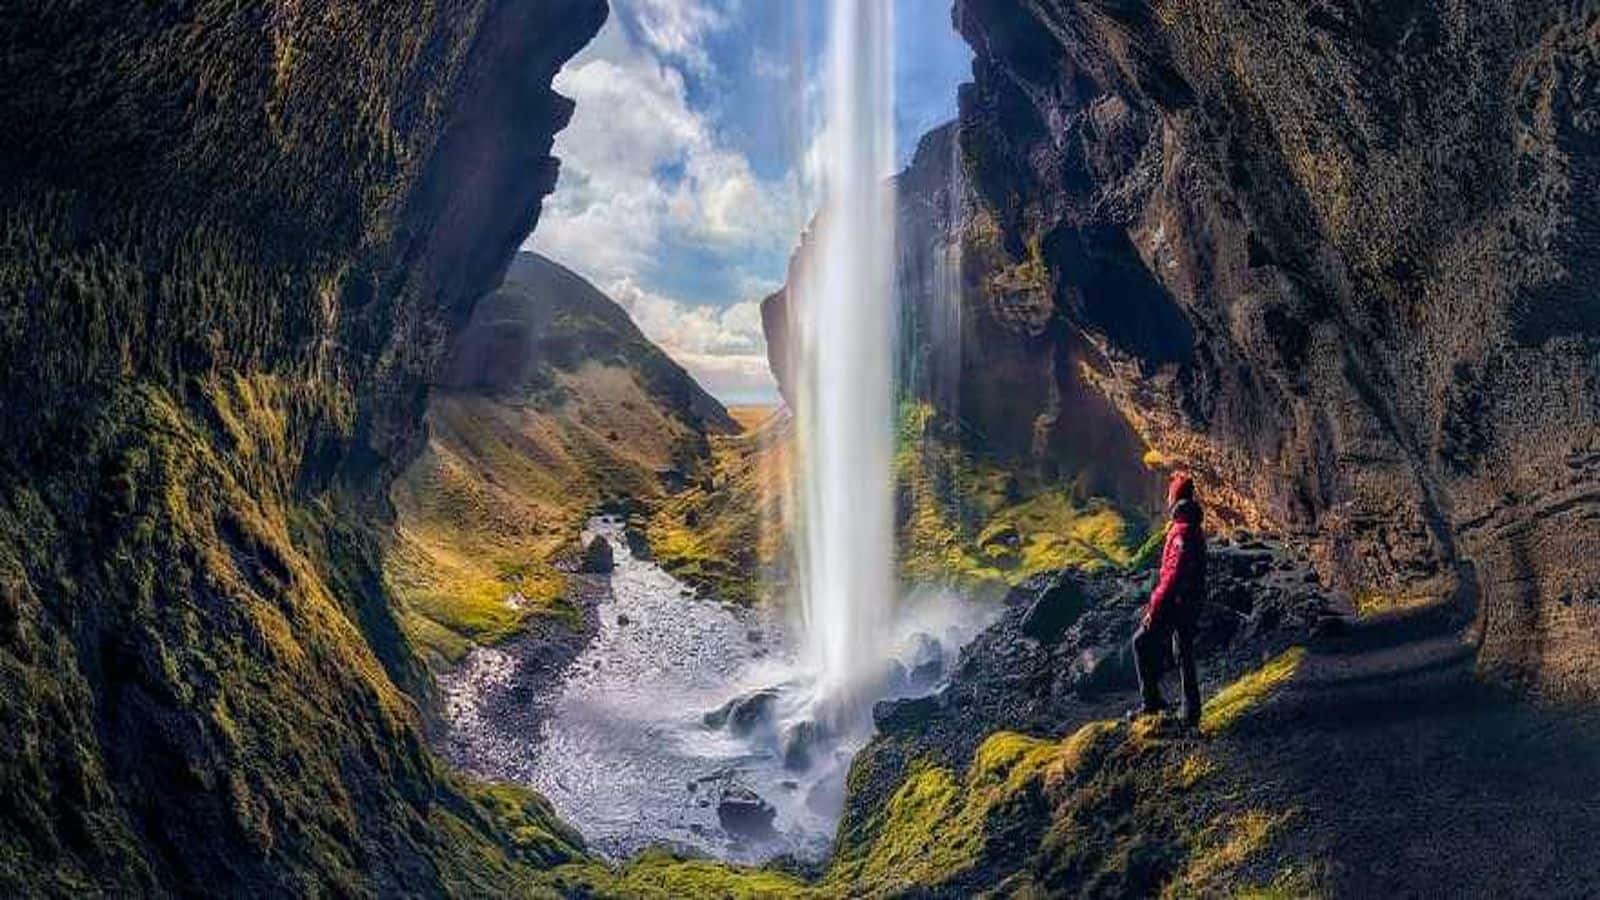 Things to do at Mystical falls in Seljalandsfoss, Iceland